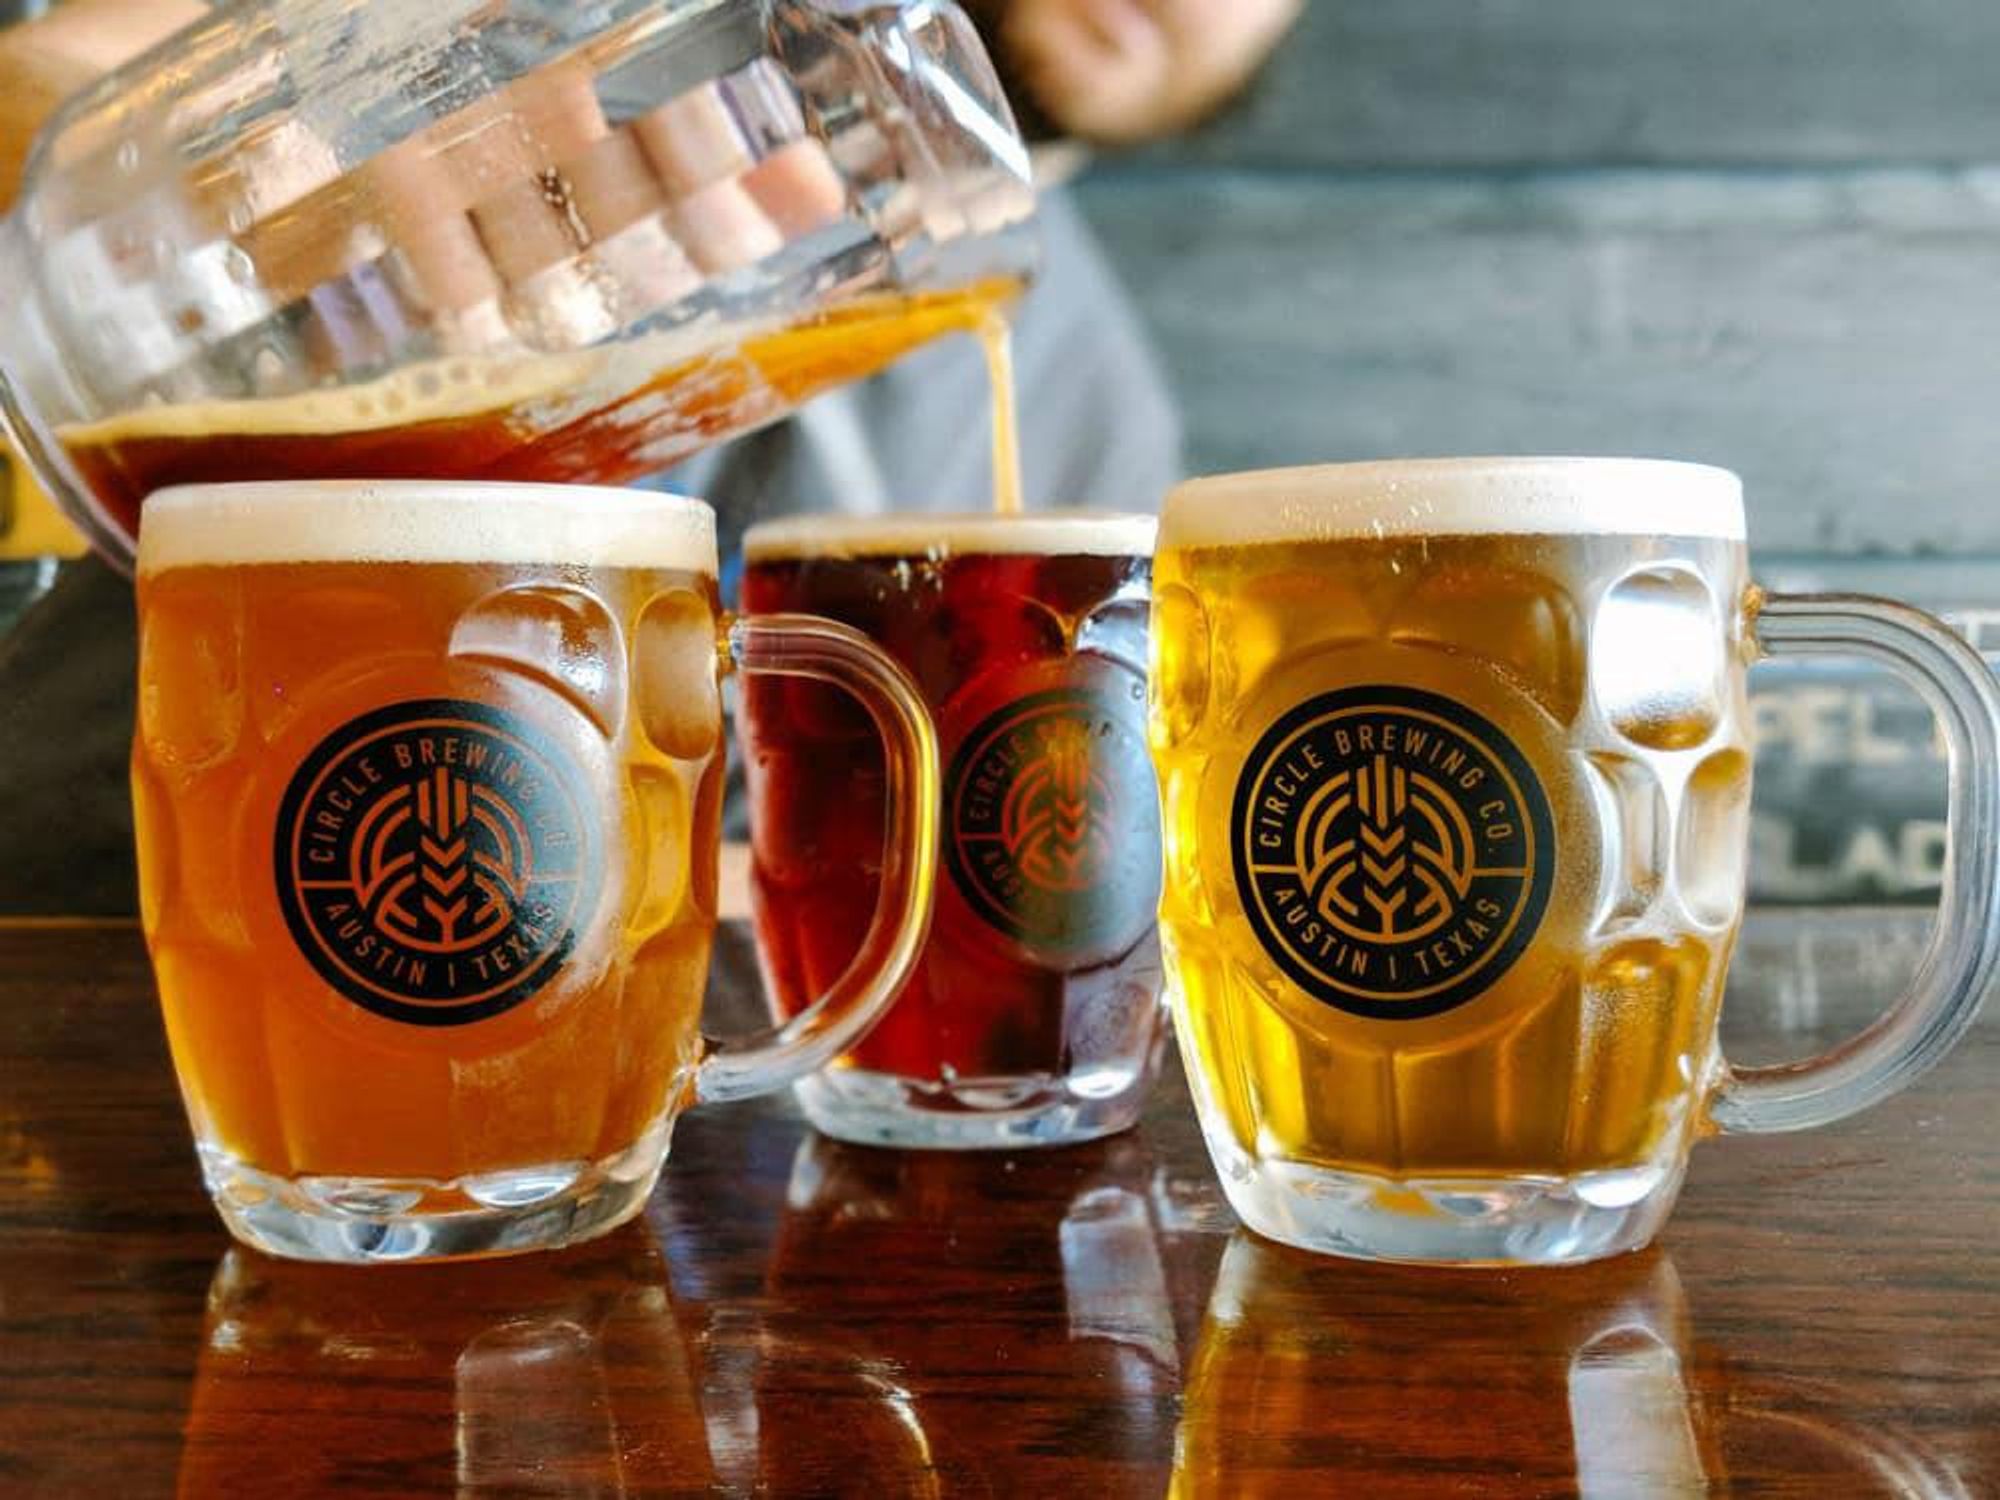 11 IPA Beer Glasses to Give Your Guests Bar Envy